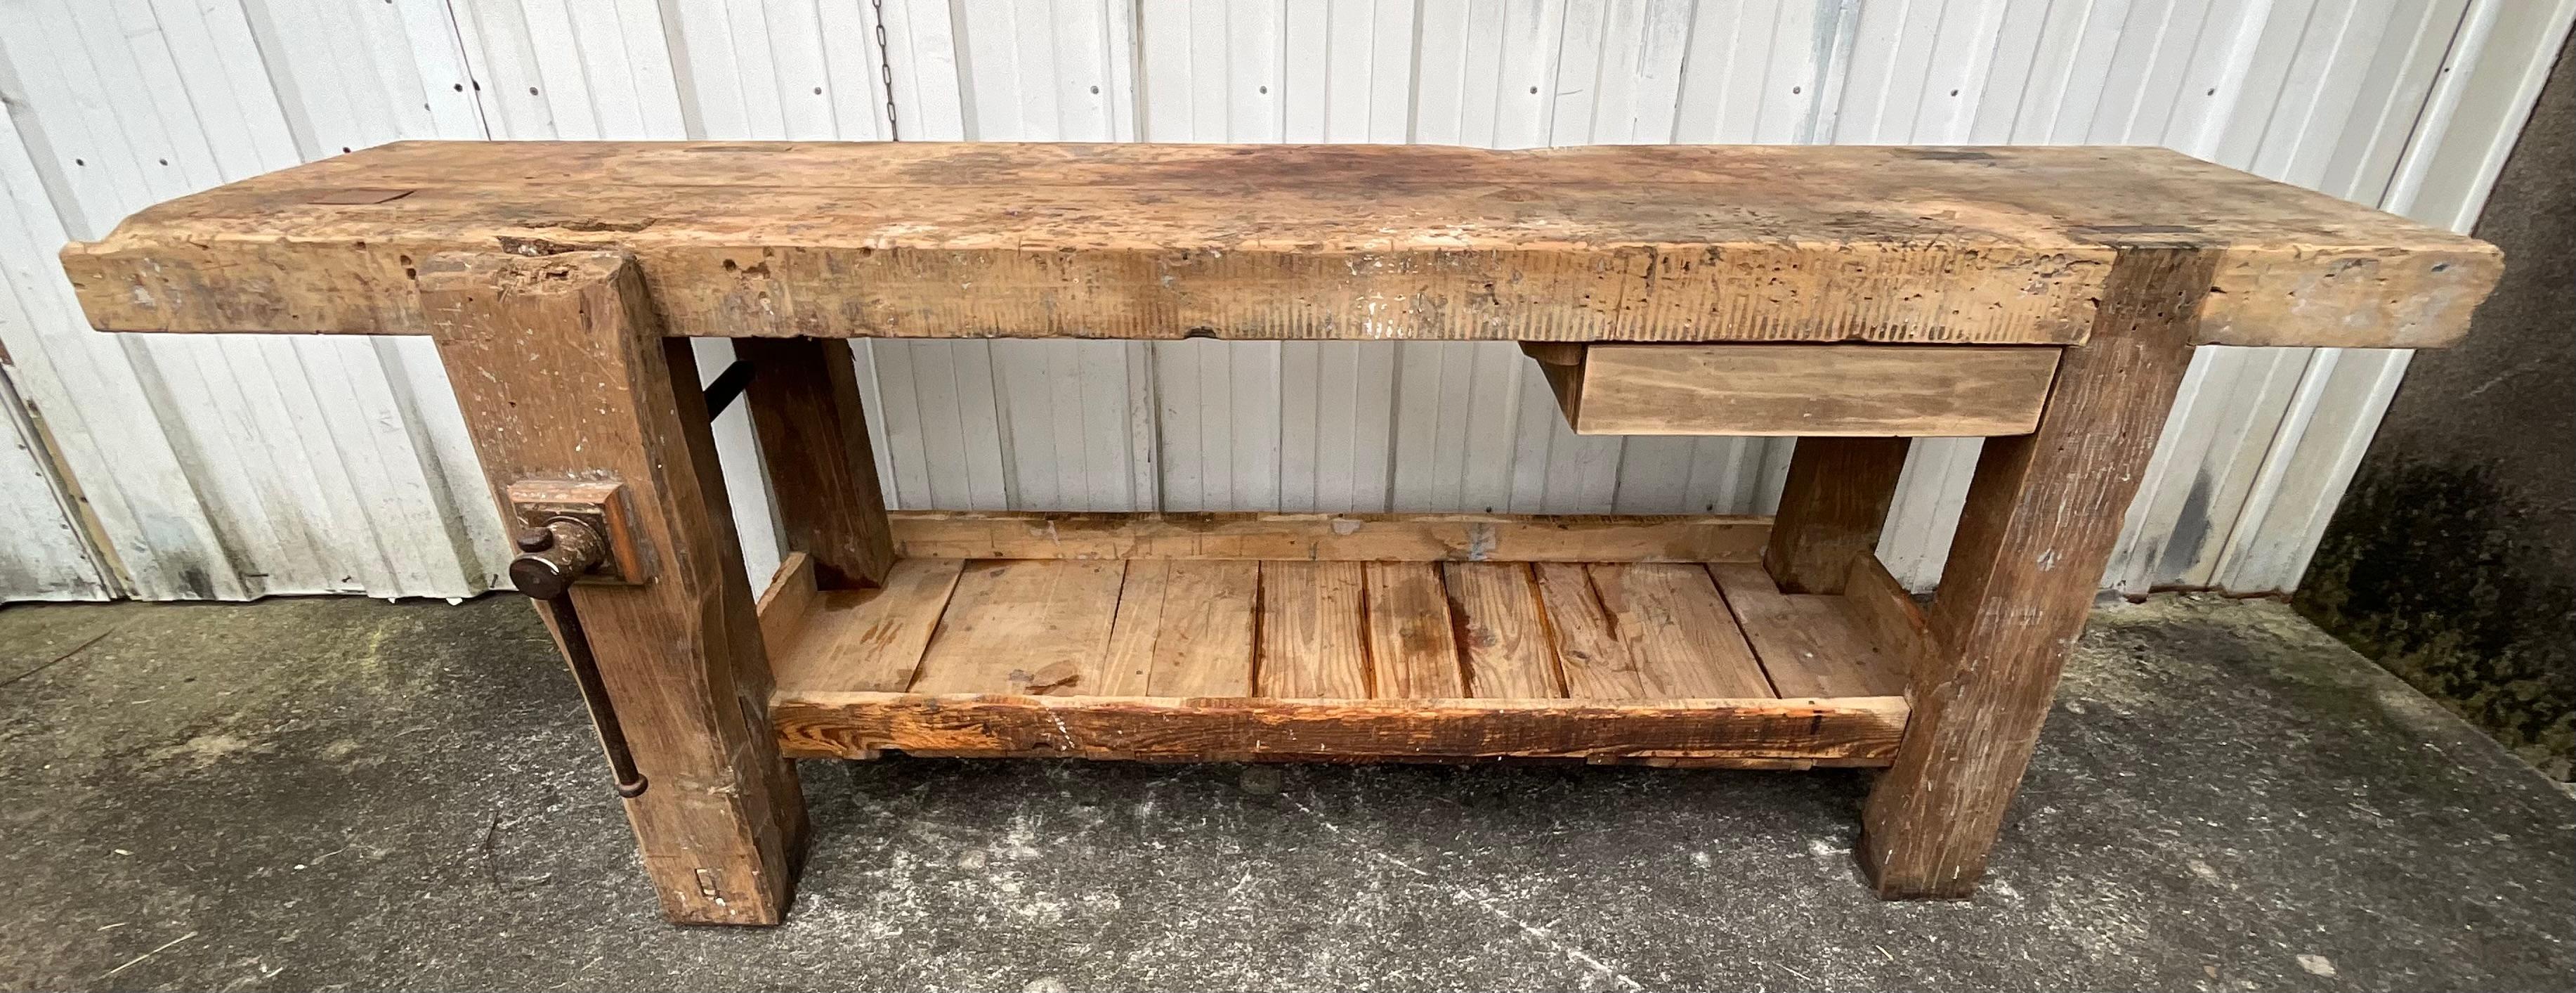 Hand-Crafted Giant Vintage French Workbench Early 20th Century For Sale